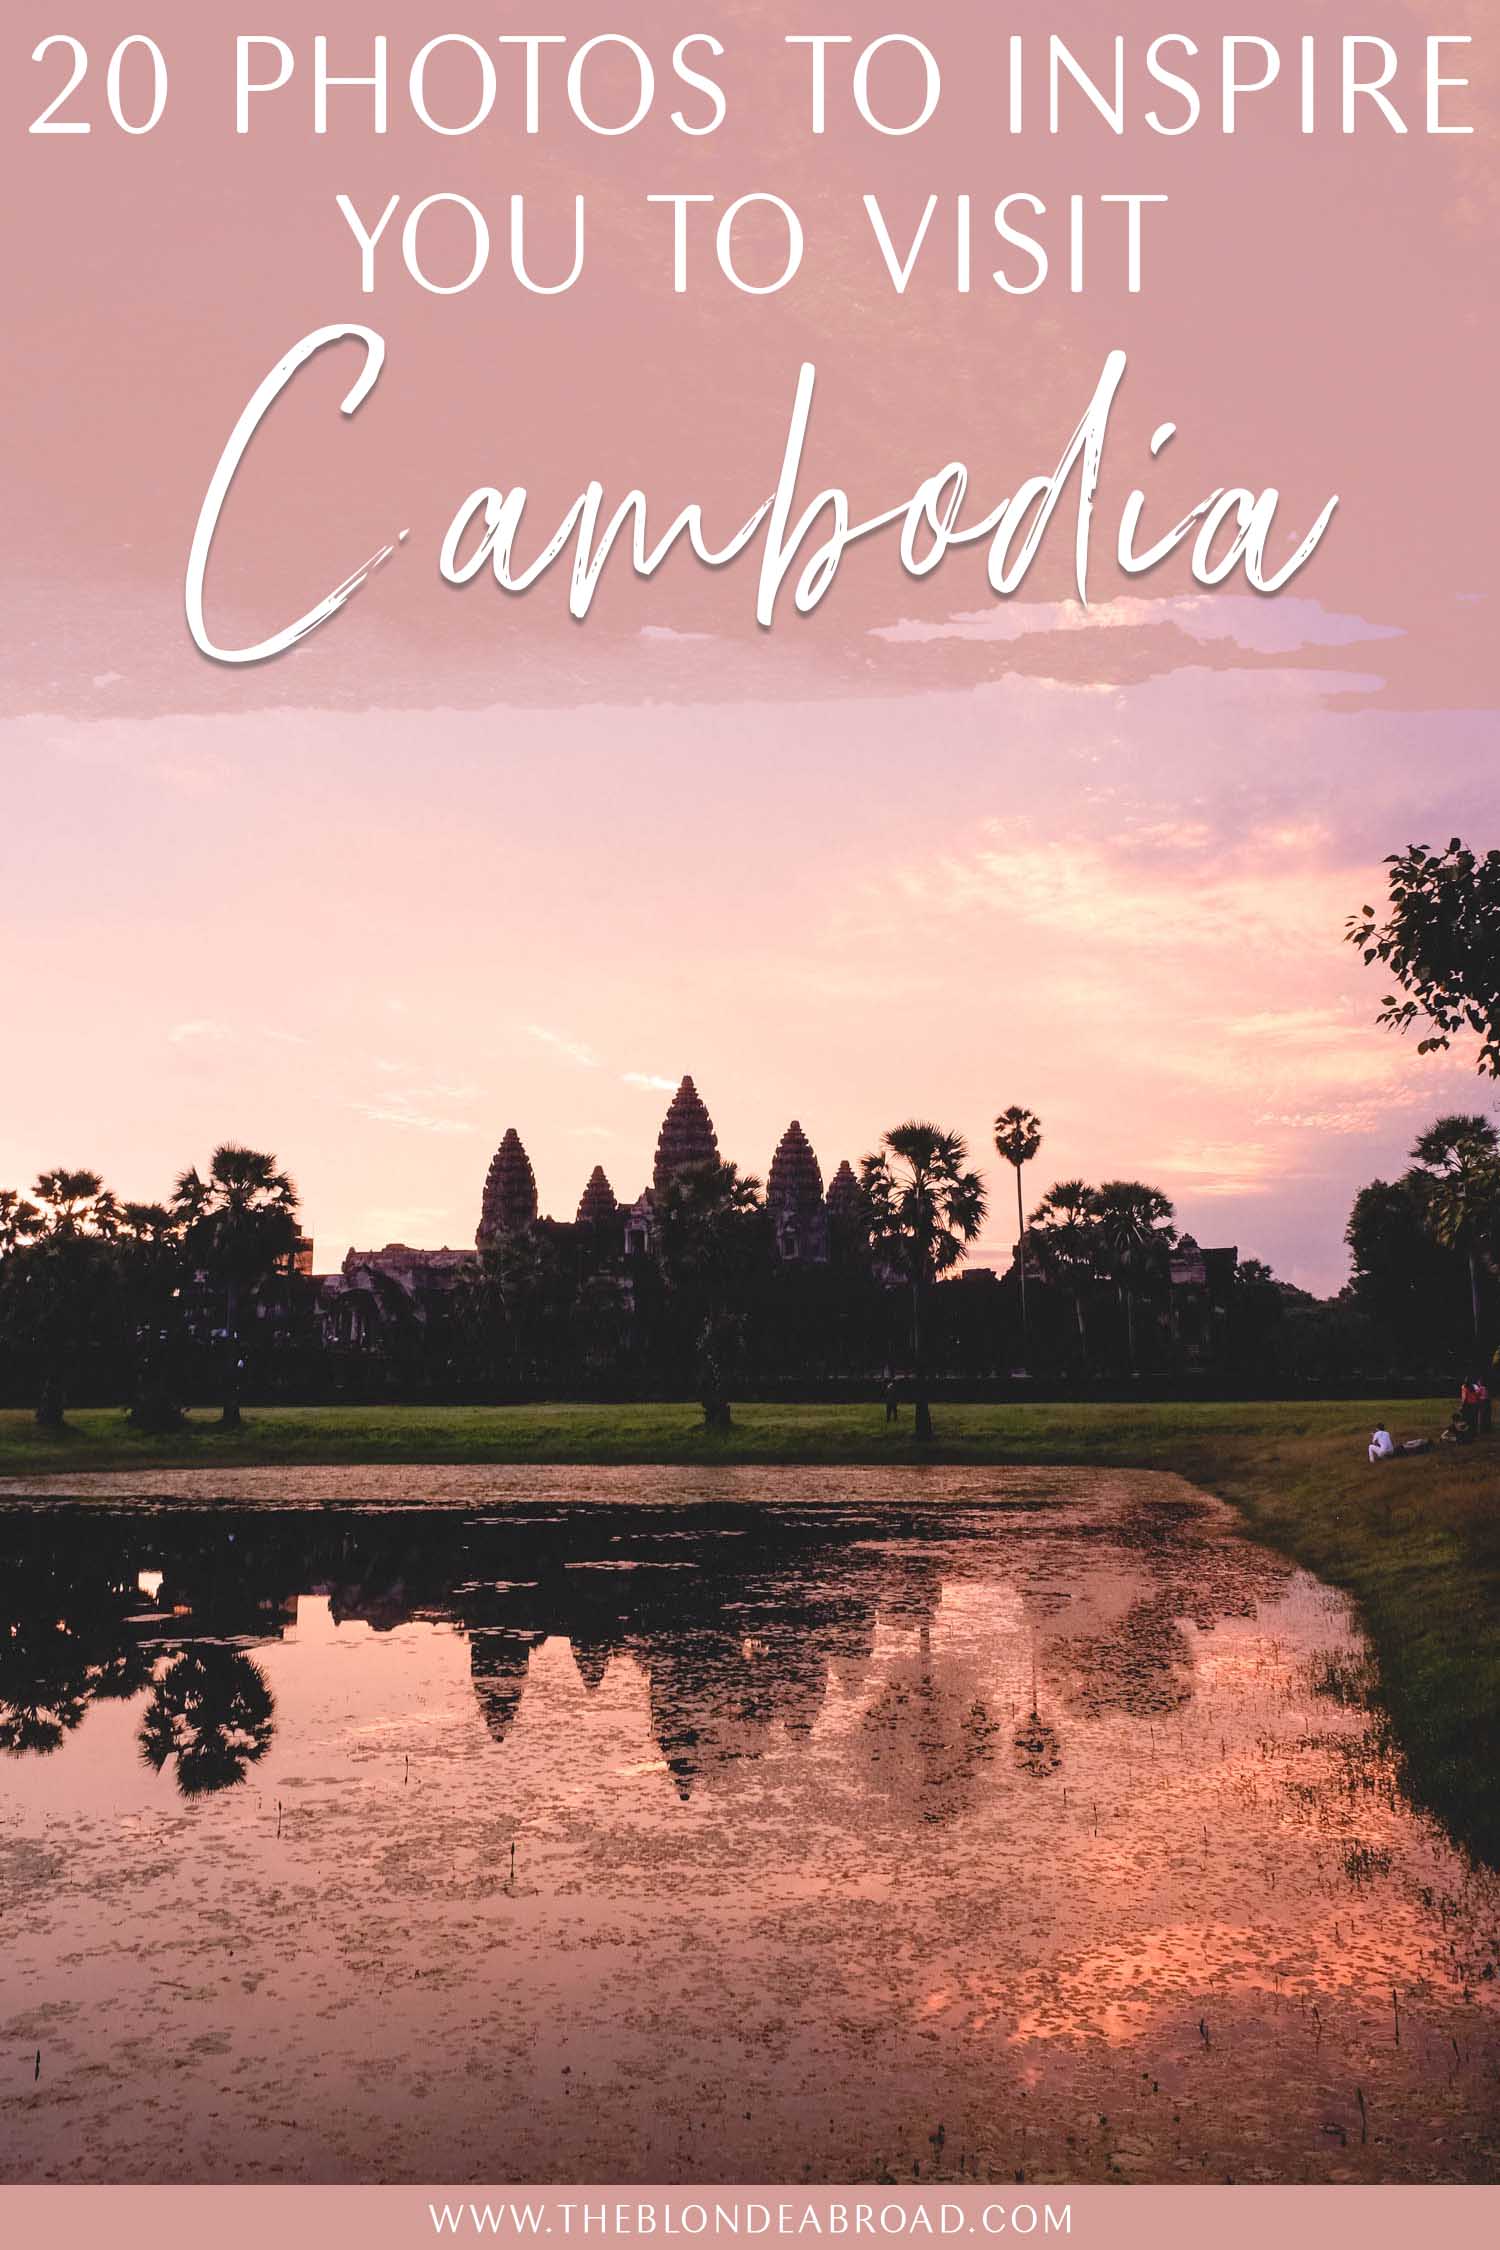 20 Photos to Inspire You to Visit Cambodia